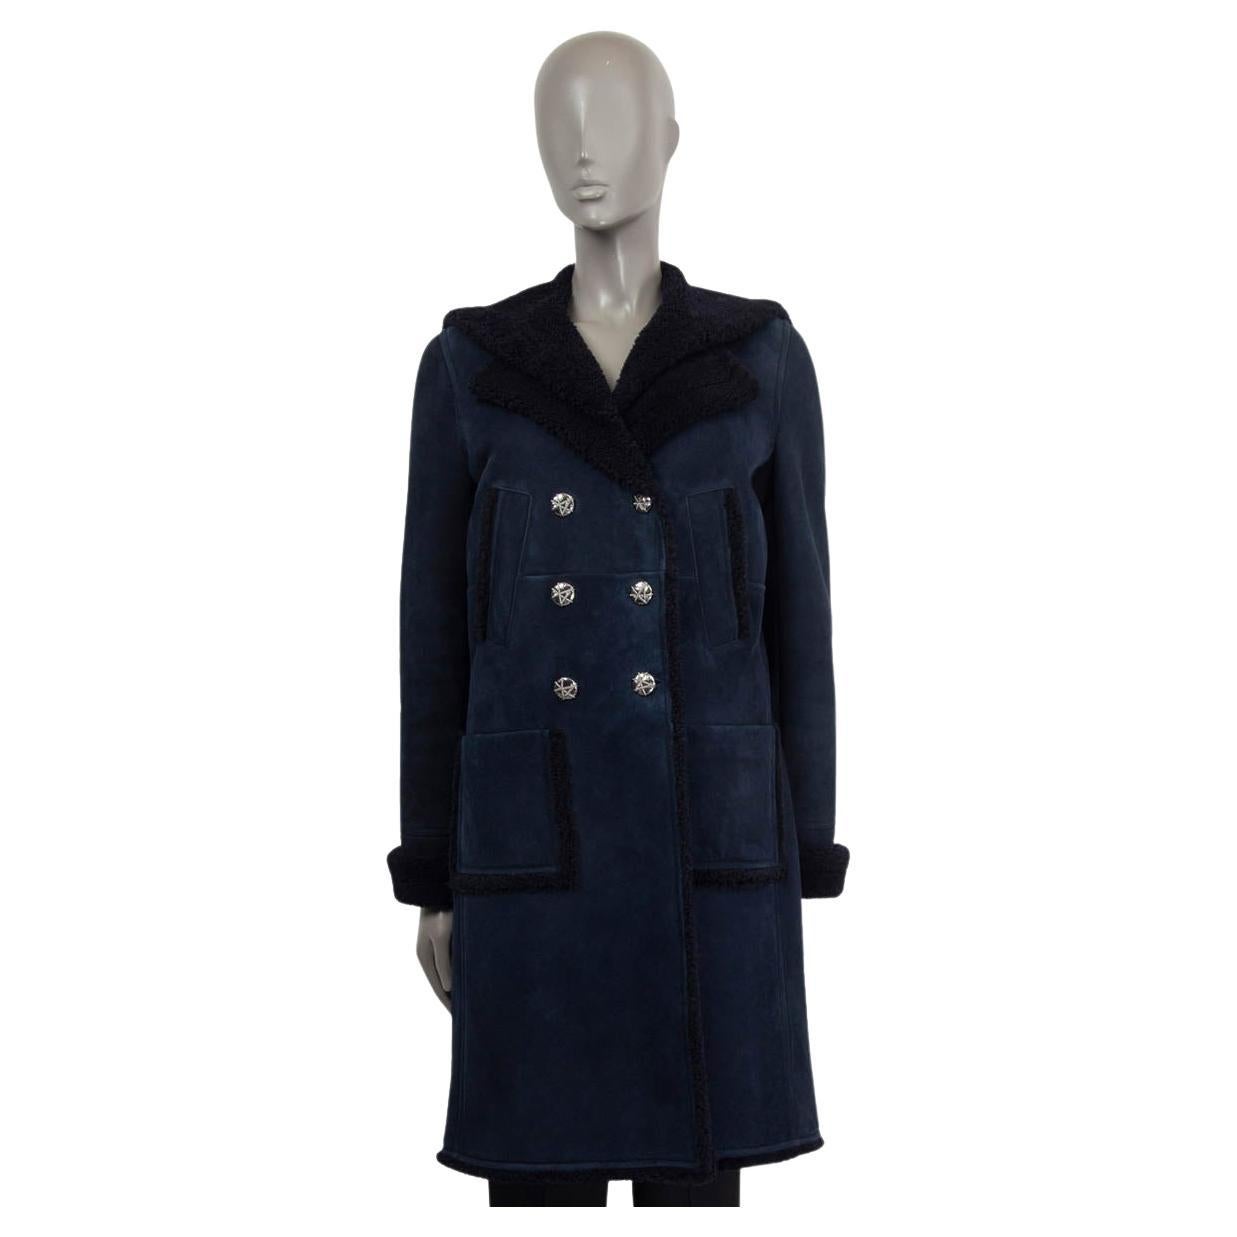 CHANEL navy blue 2018 18A HAMBURG SUEDE & SHEARLING Coat Jacket 38 S For Sale